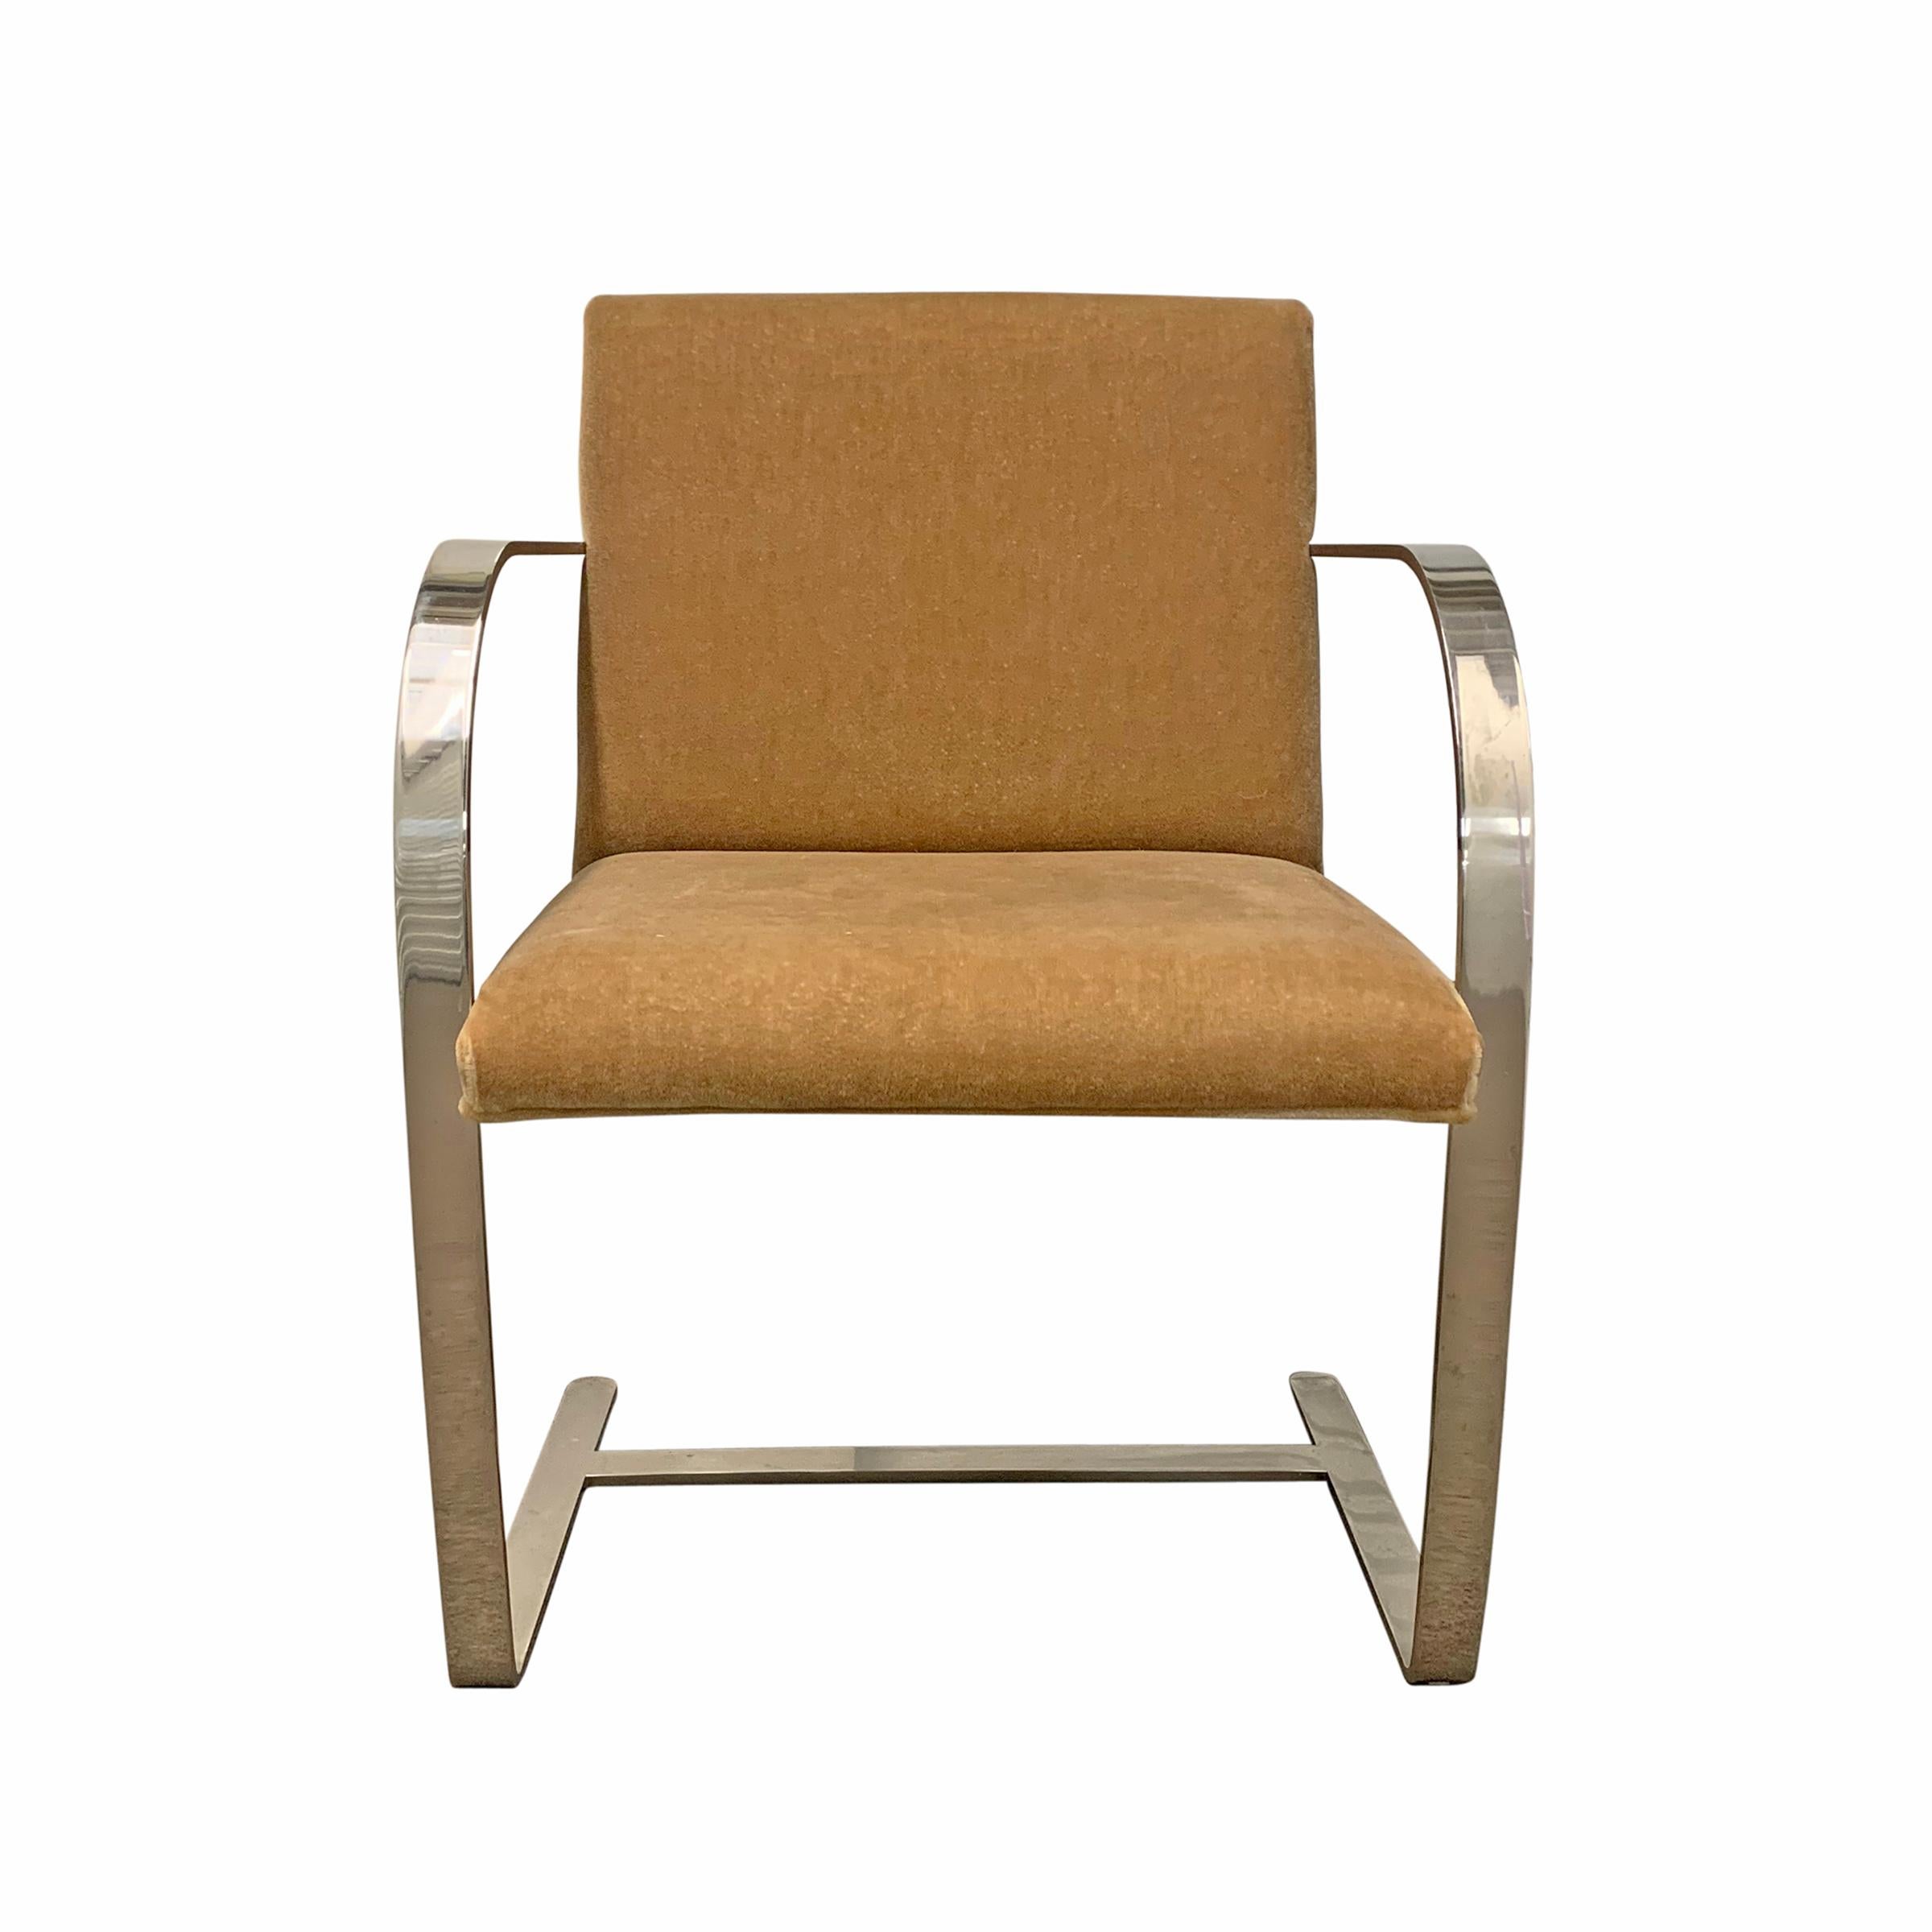 Modern Pair of Brno Chairs by Mies van der Rohe